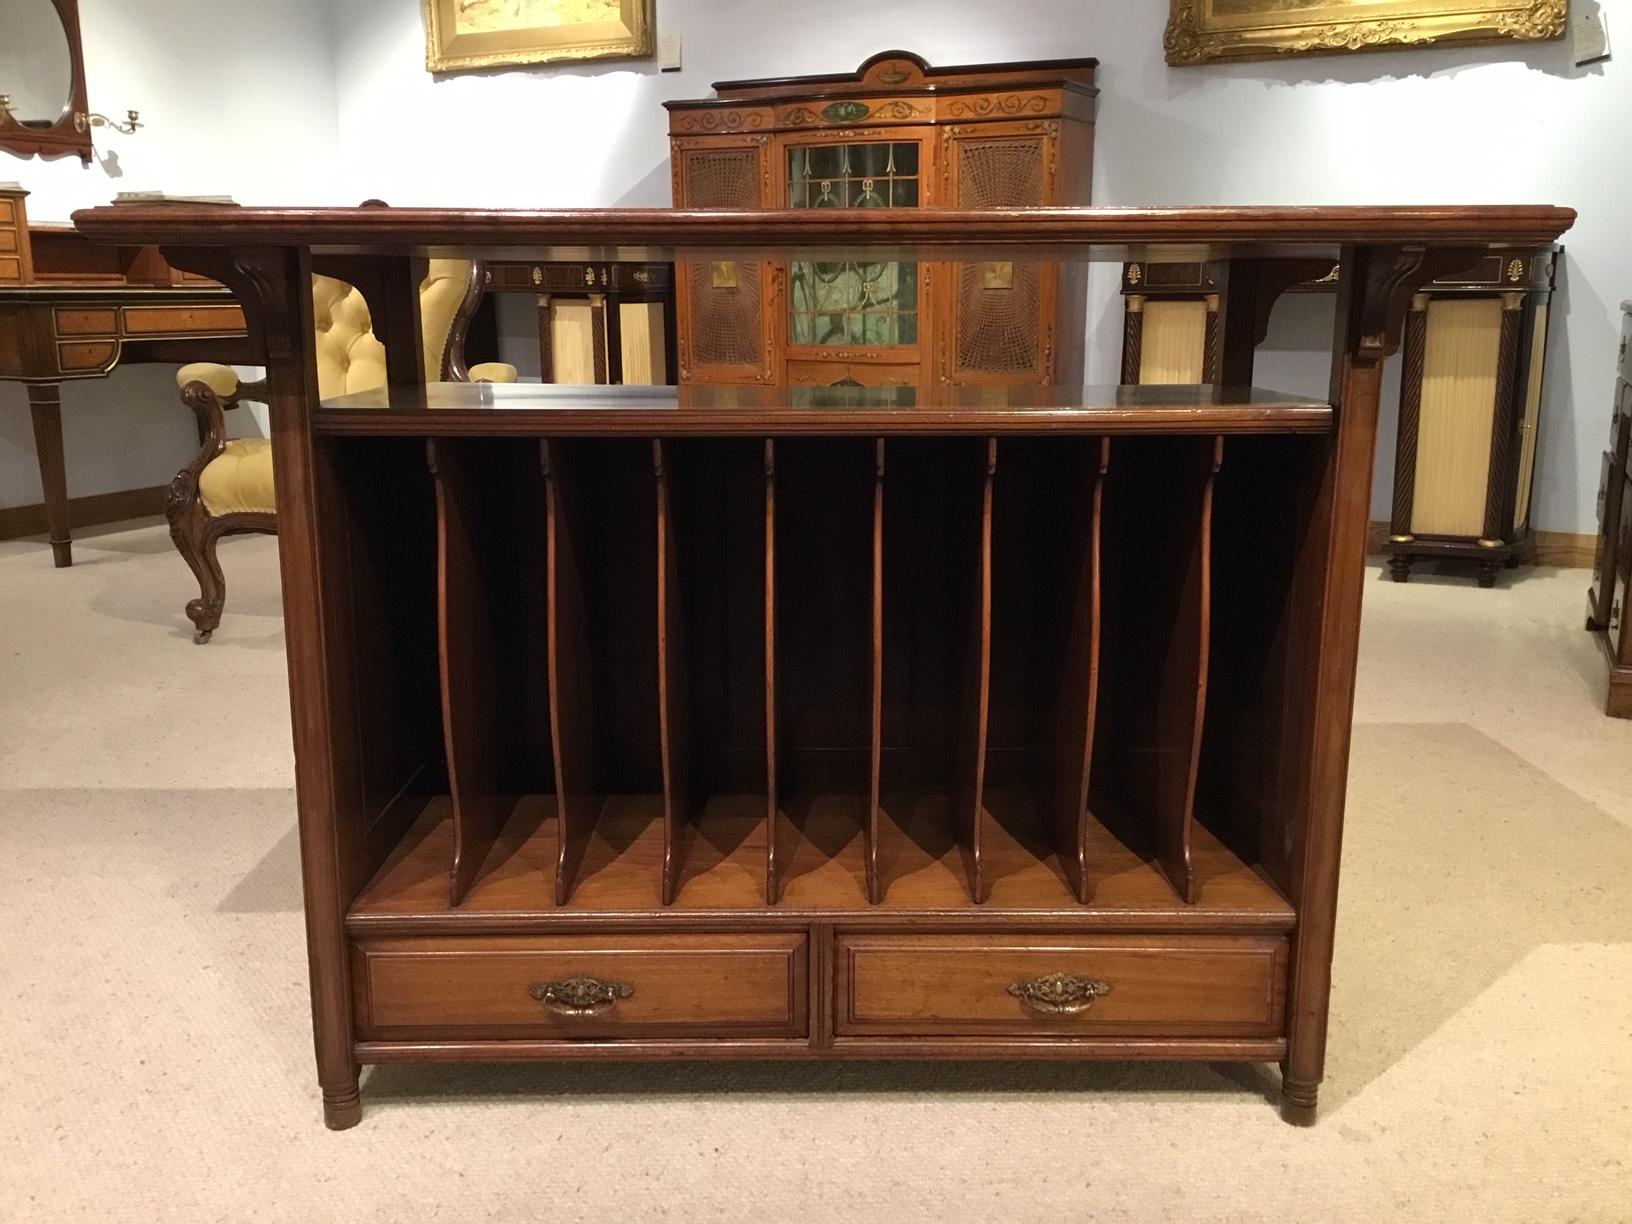 Late Victorian Period Aesthetic Walnut Stand In Excellent Condition For Sale In Darwen, GB